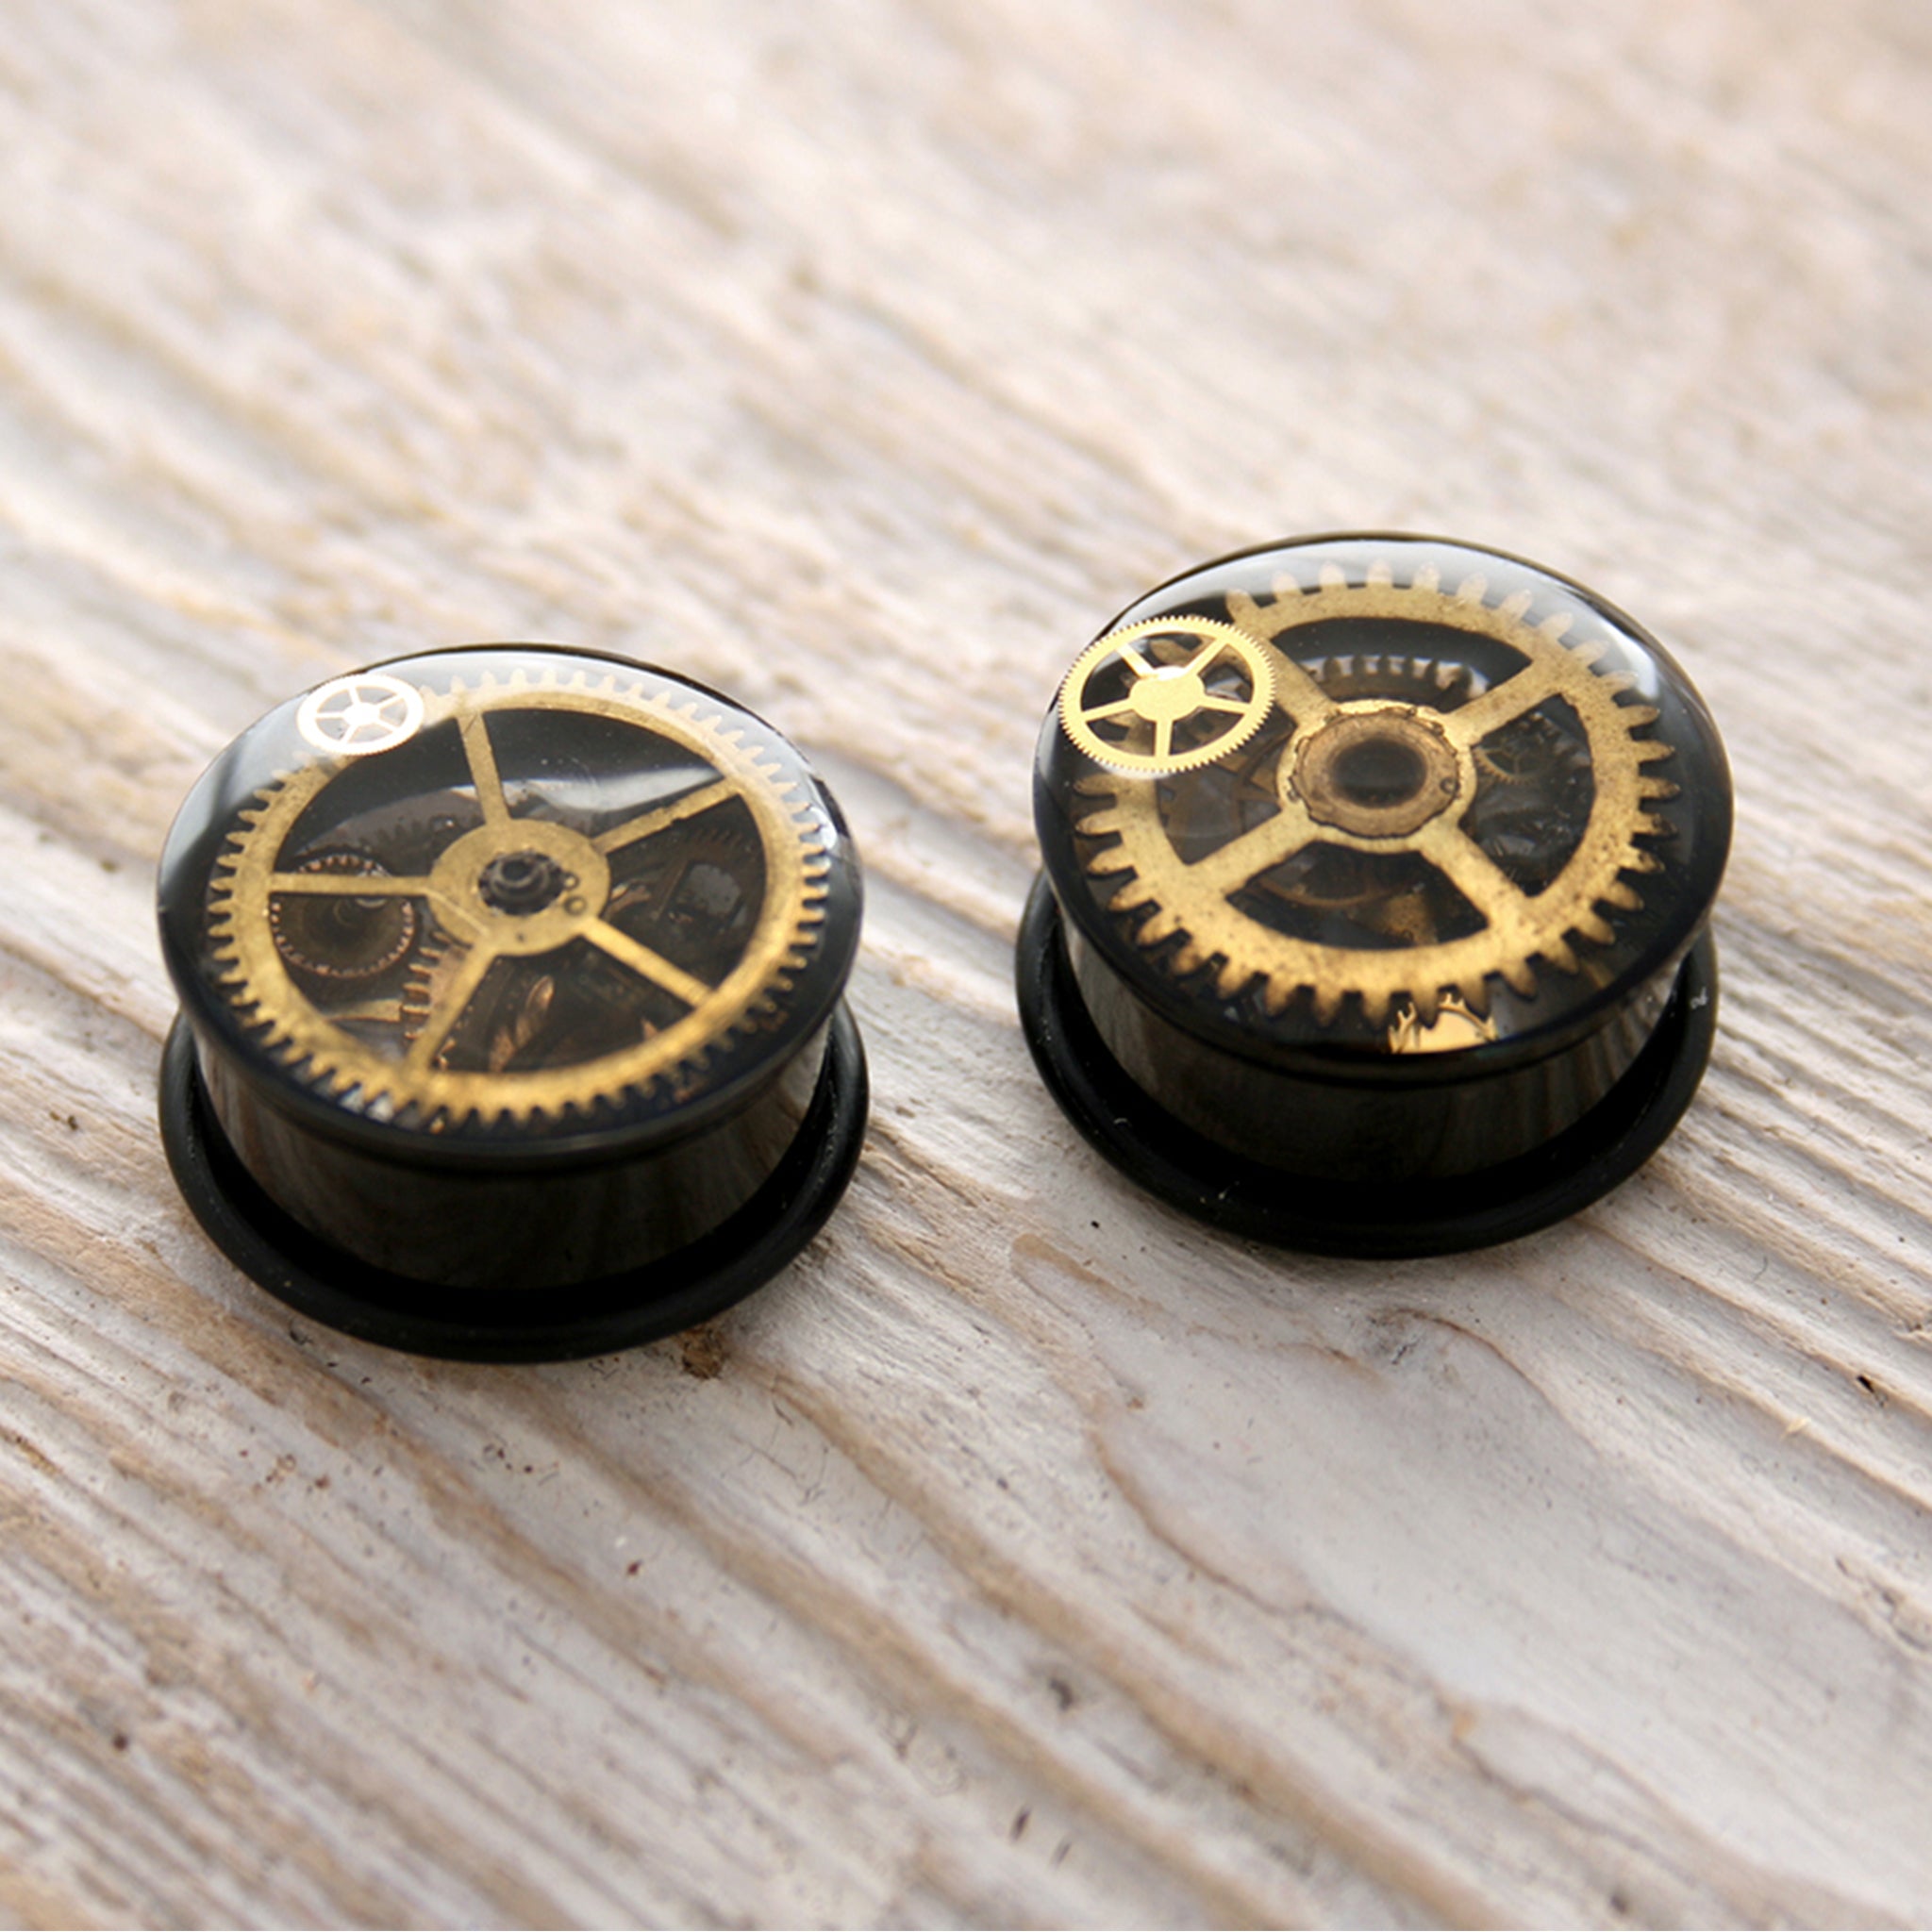 Black steampunk plug earrings with real watch parts in resin